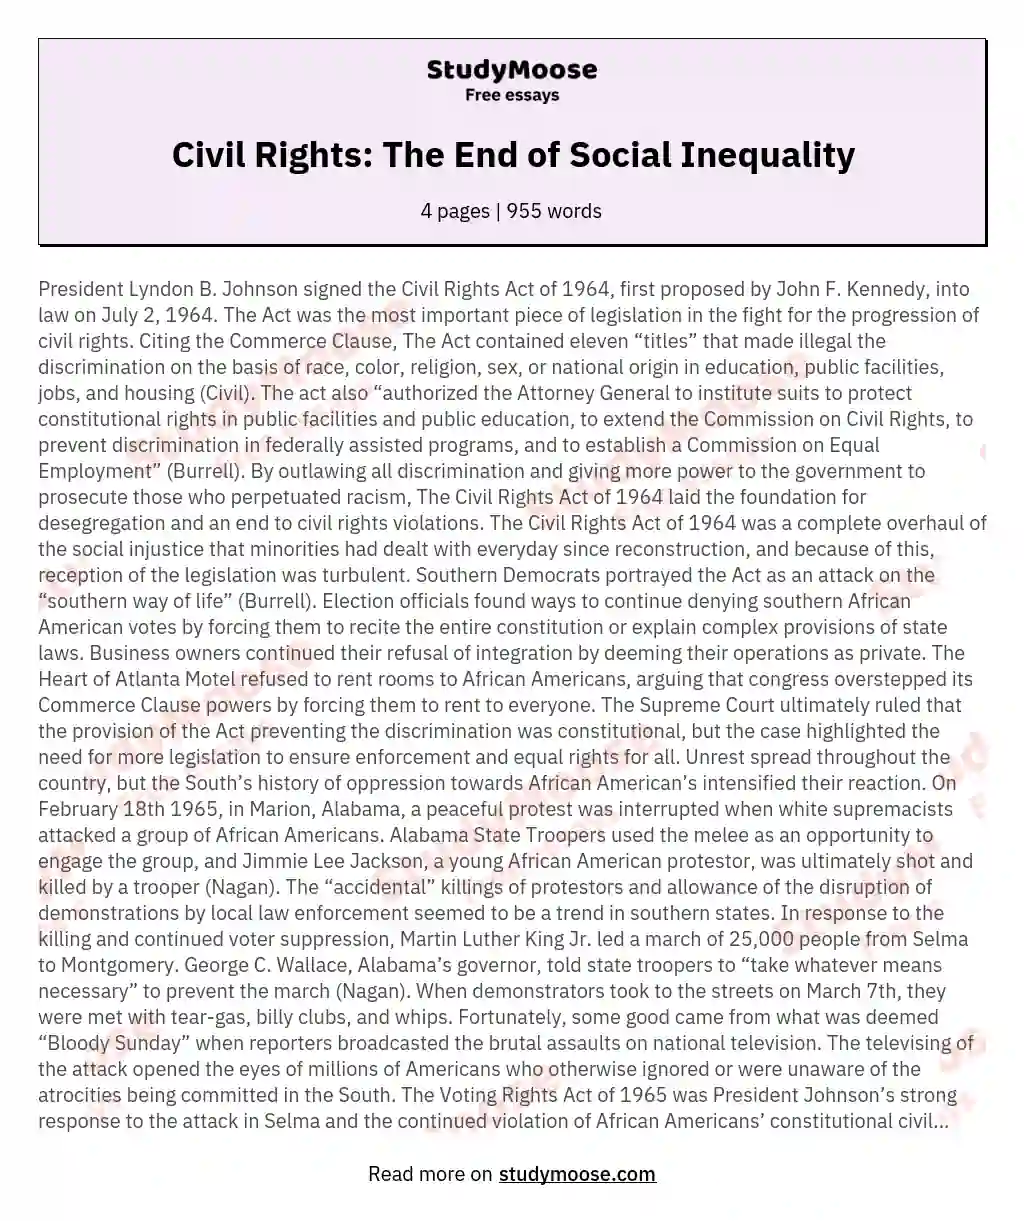 Civil Rights: The End of Social Inequality essay